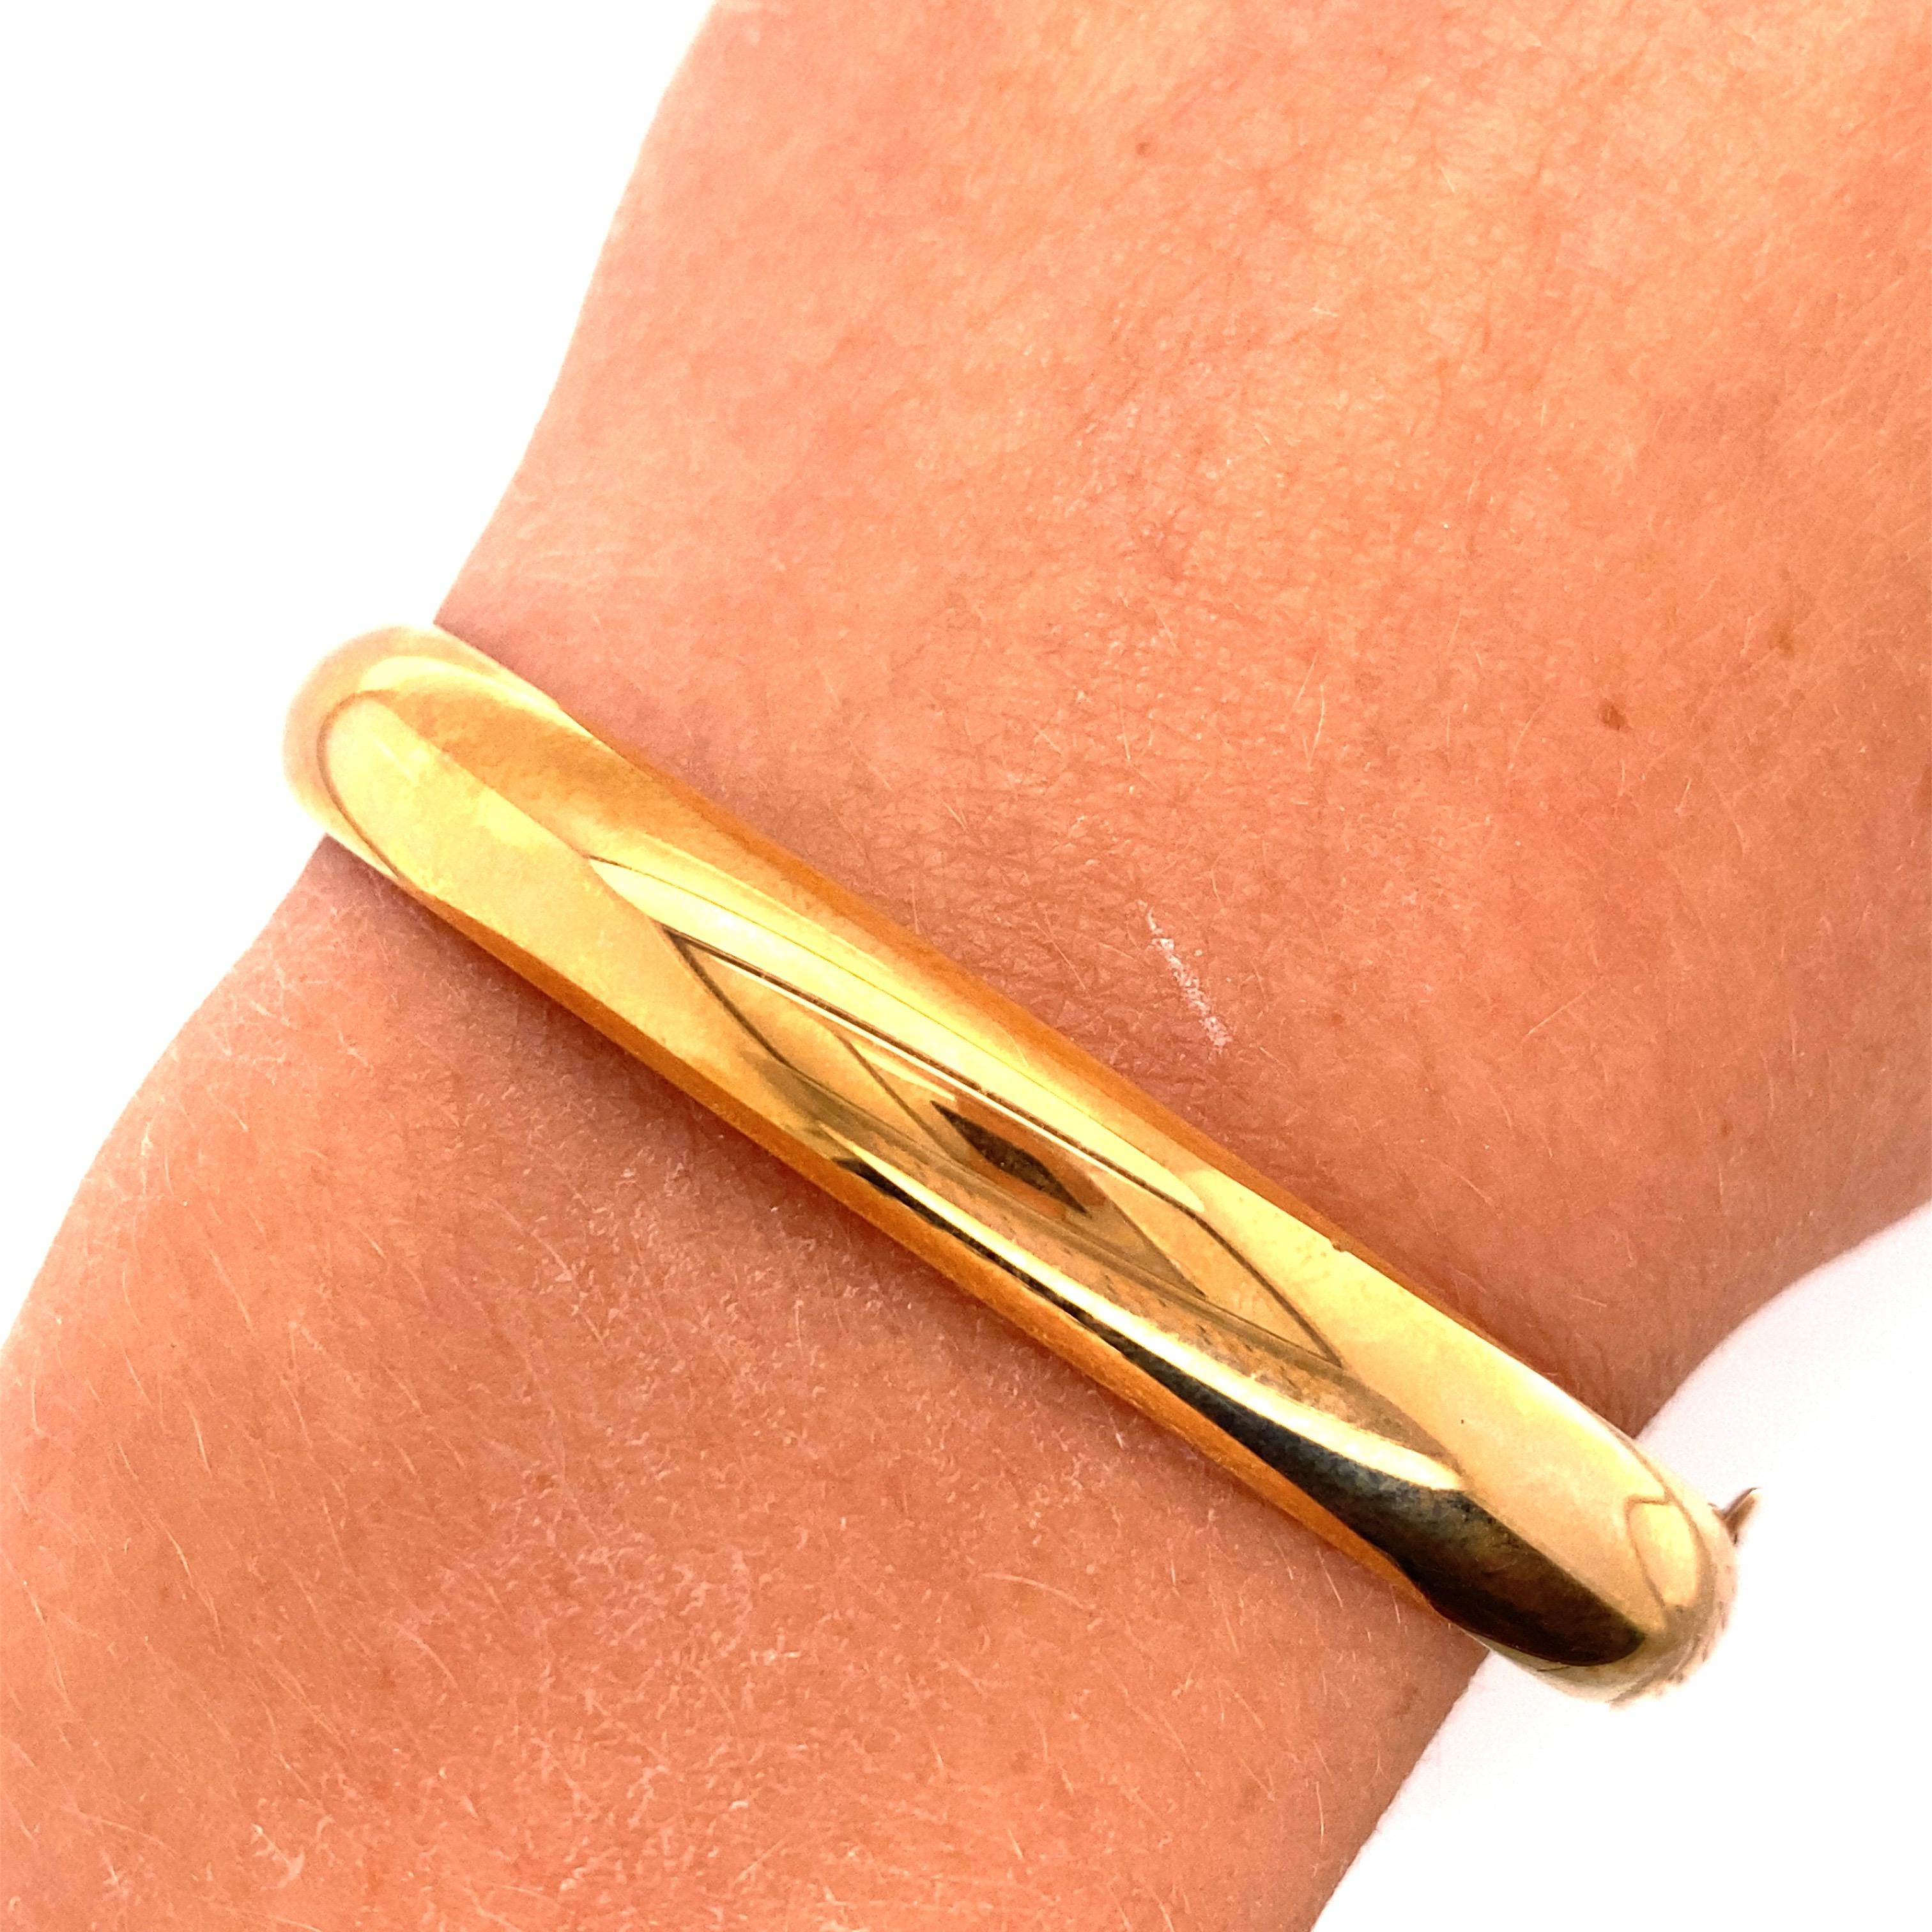 14K Yellow Gold Engraved Bangle Bracelet - The bracelet is 8mm wide. The inside diameter is 2.12 inches high and 2.35 inches wide and fits a standard size wrist. The bangle weighs 9.48 grams.